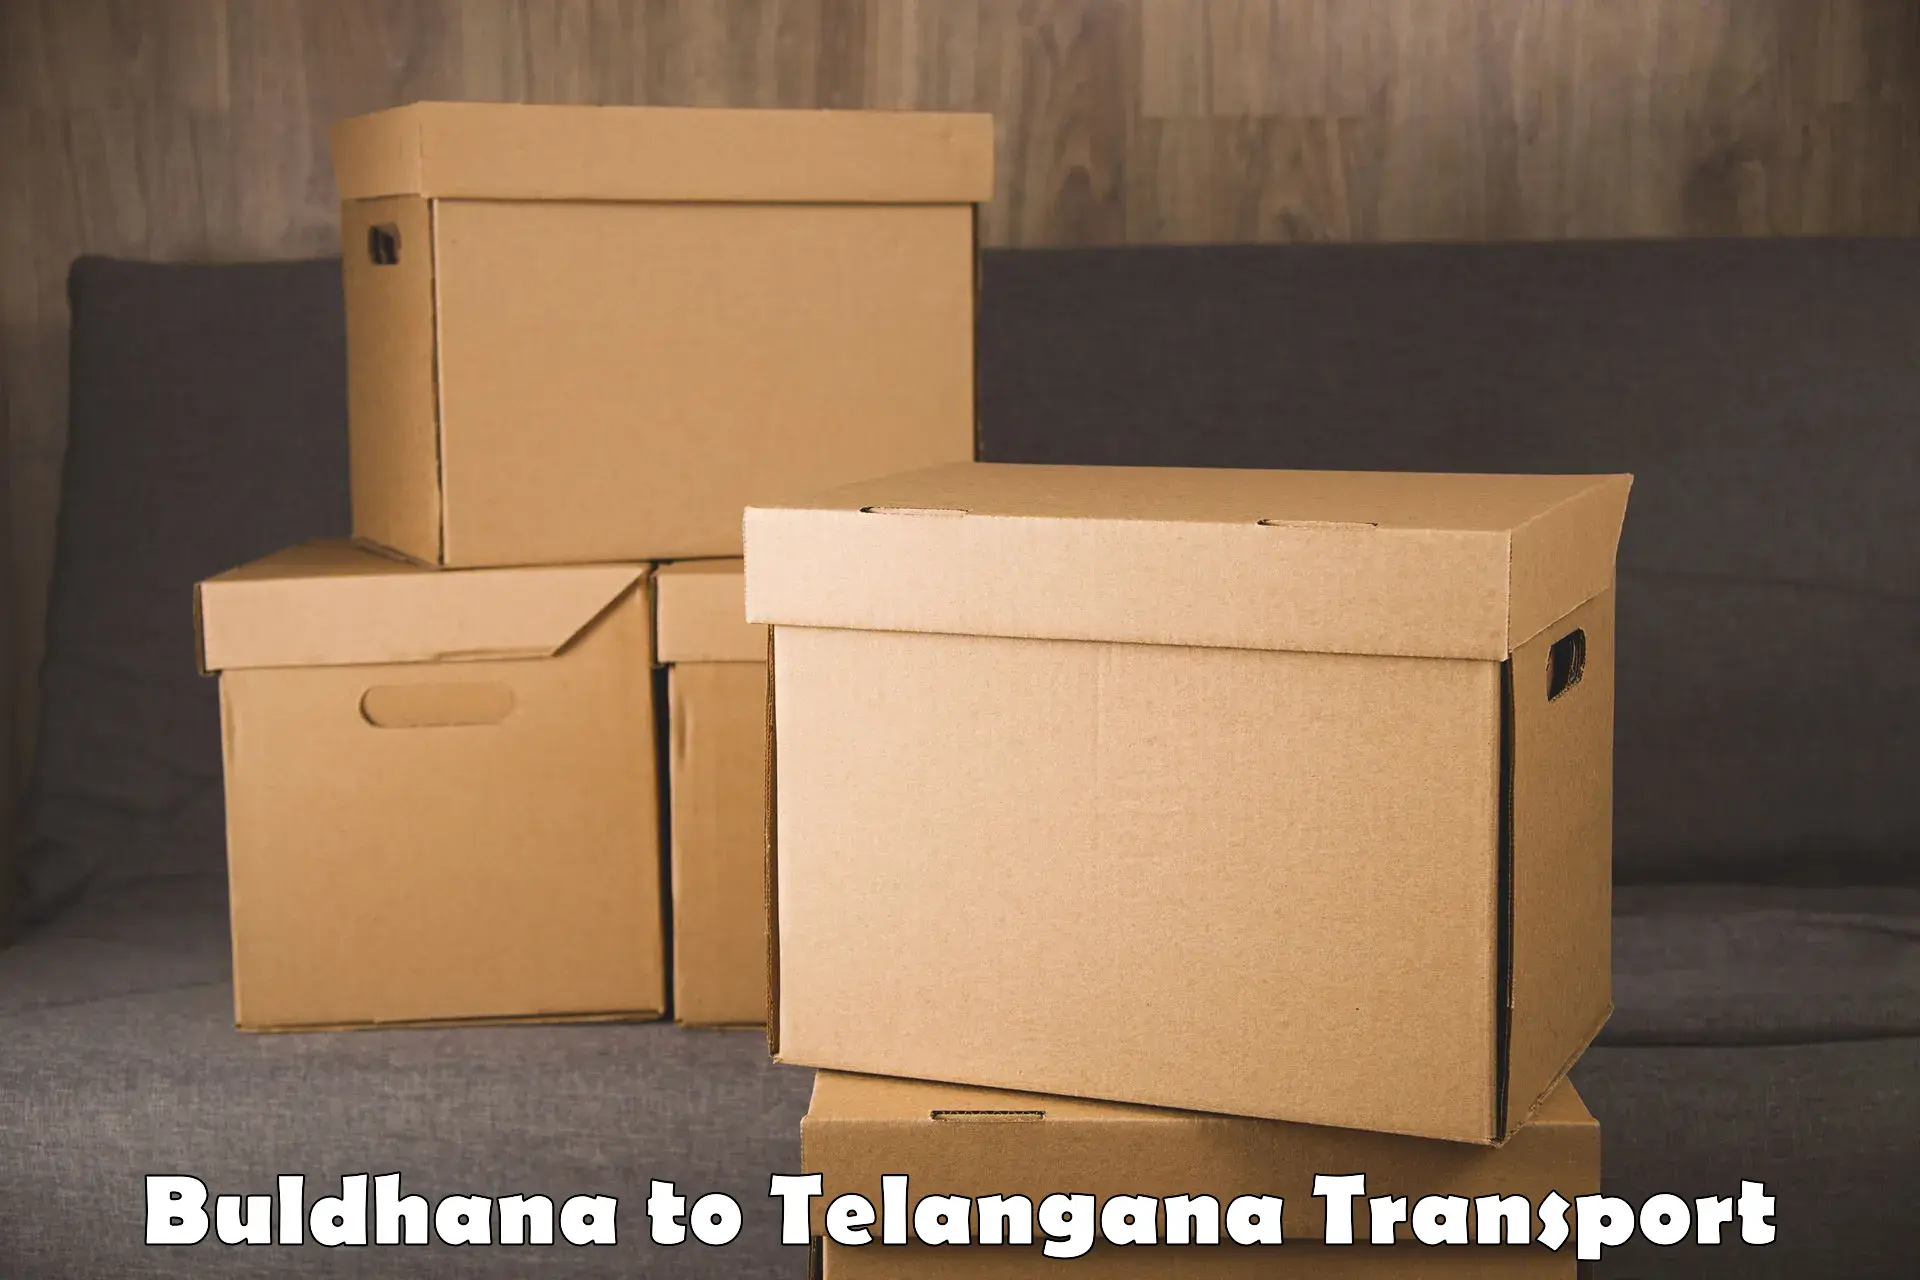 Transport shared services Buldhana to Sangareddy